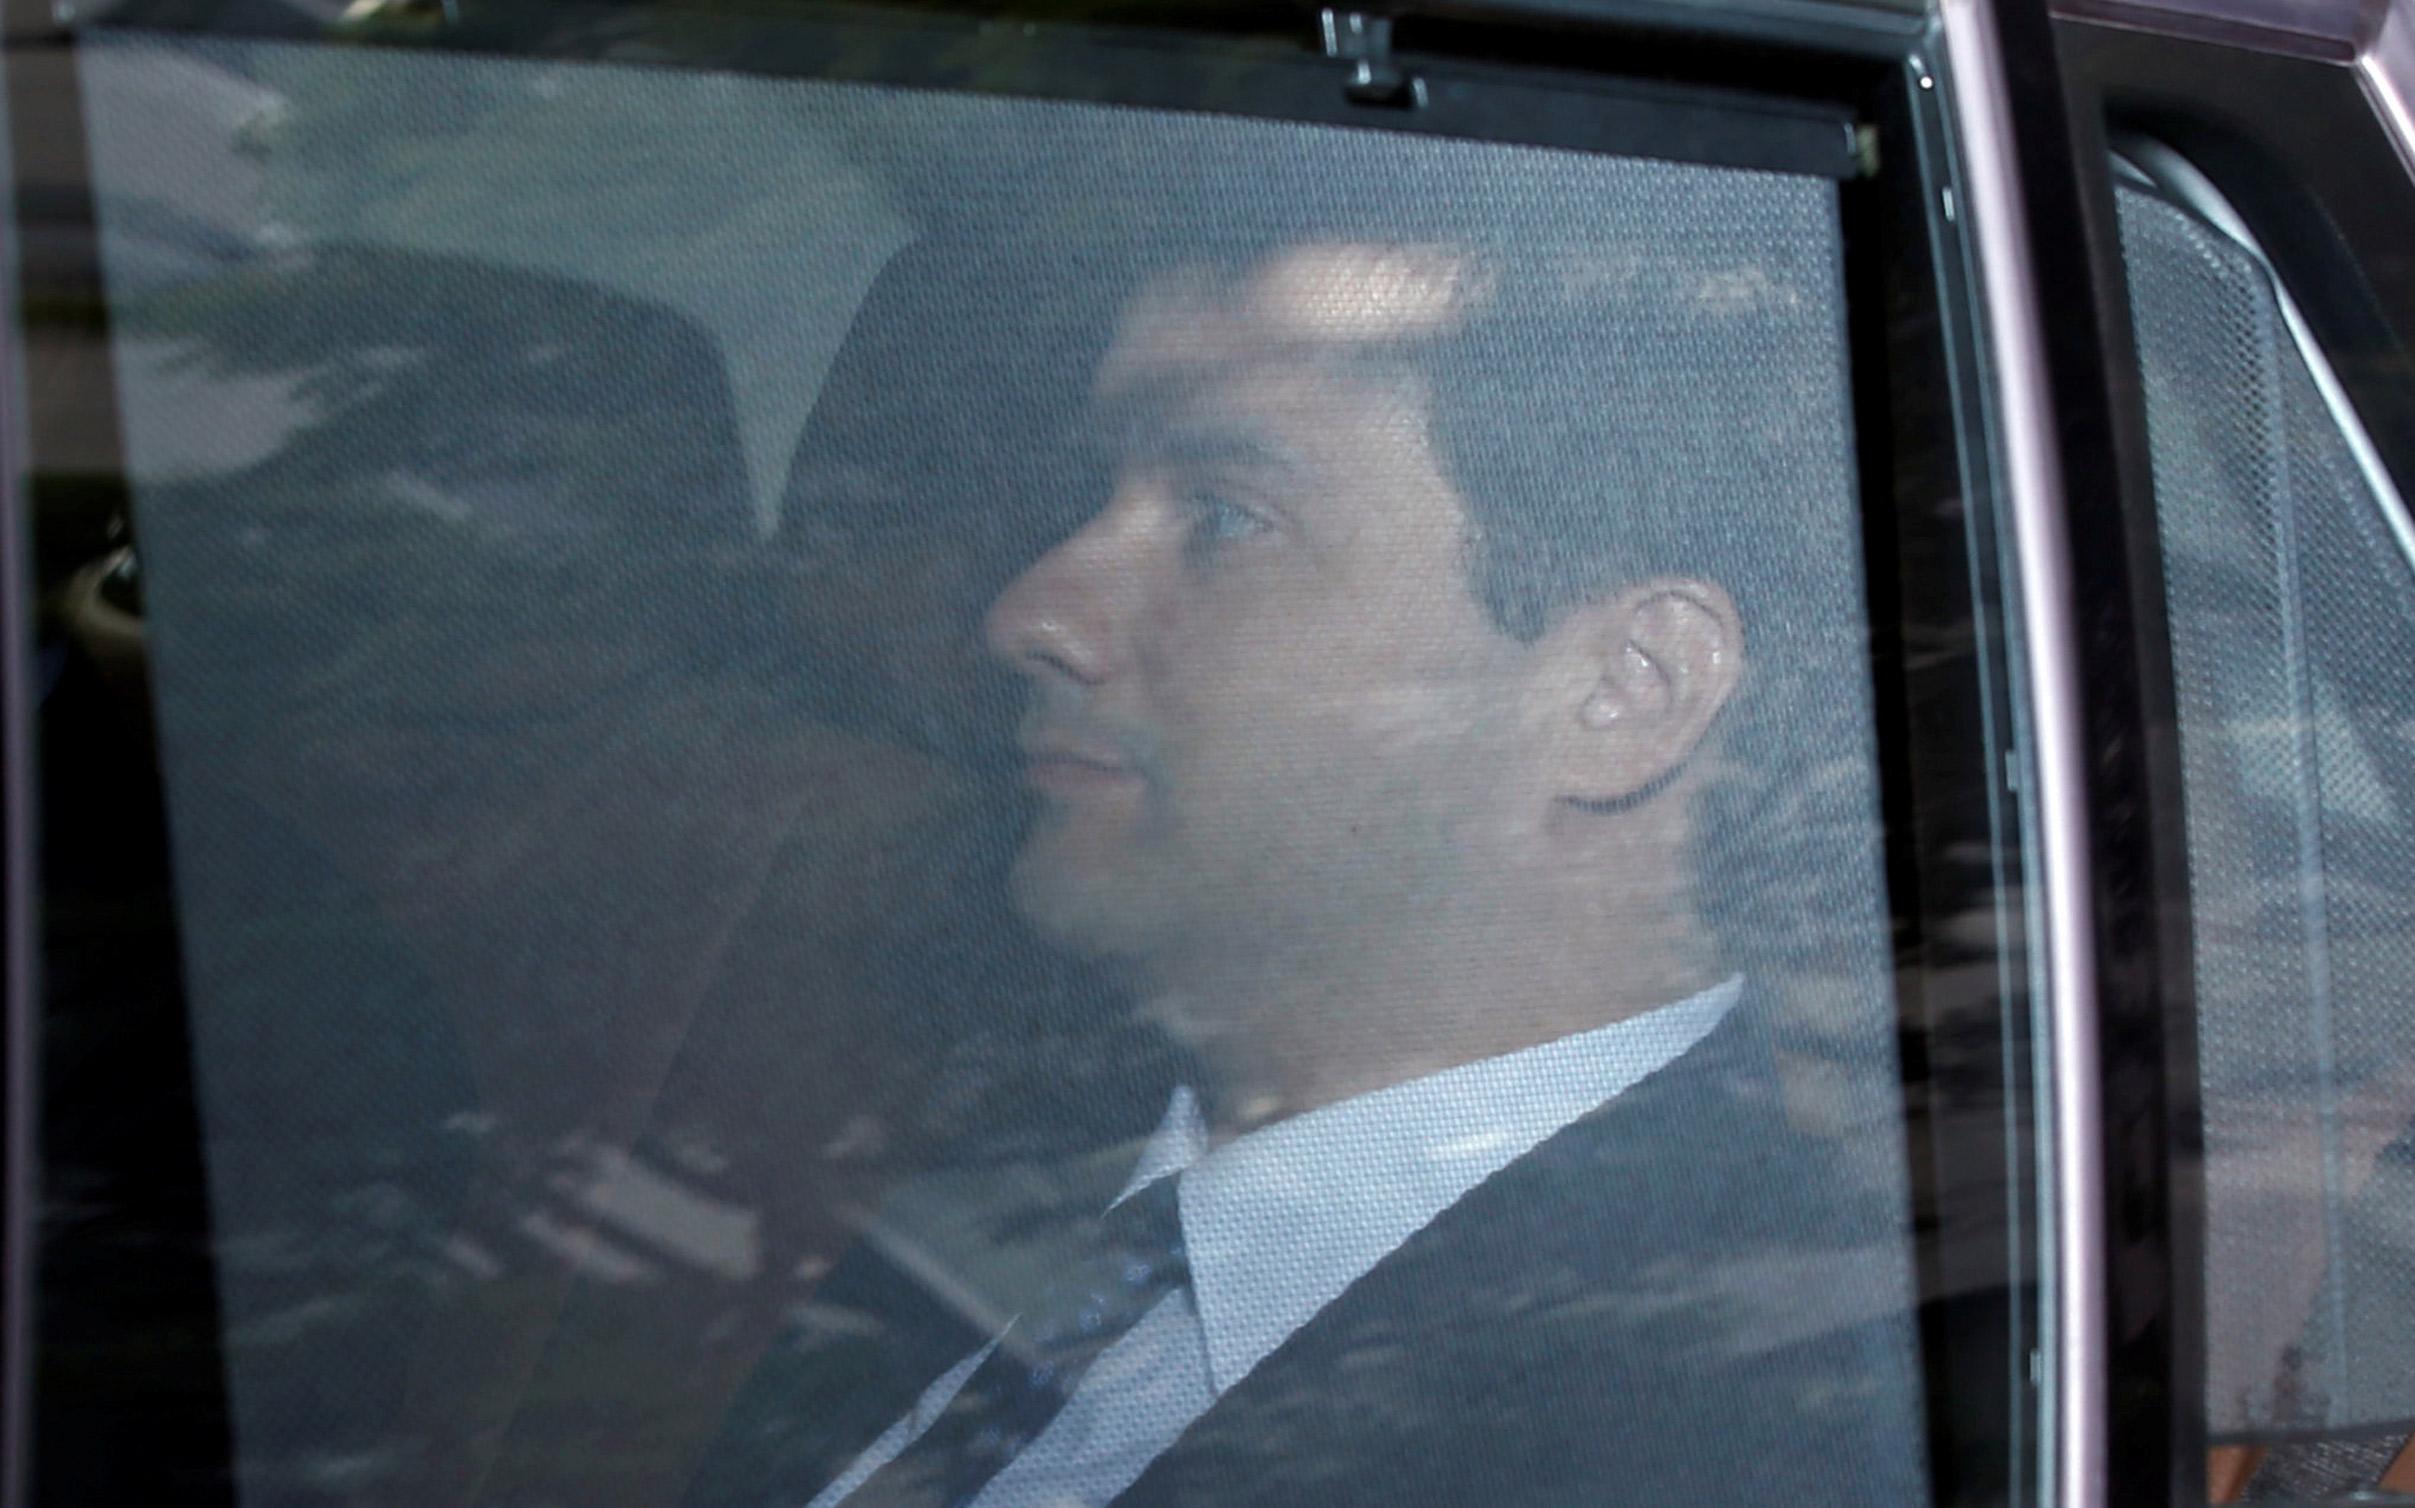 Former CEO of failed bitcoin exchange Mt. Gox pleads not guilty to embezzlement